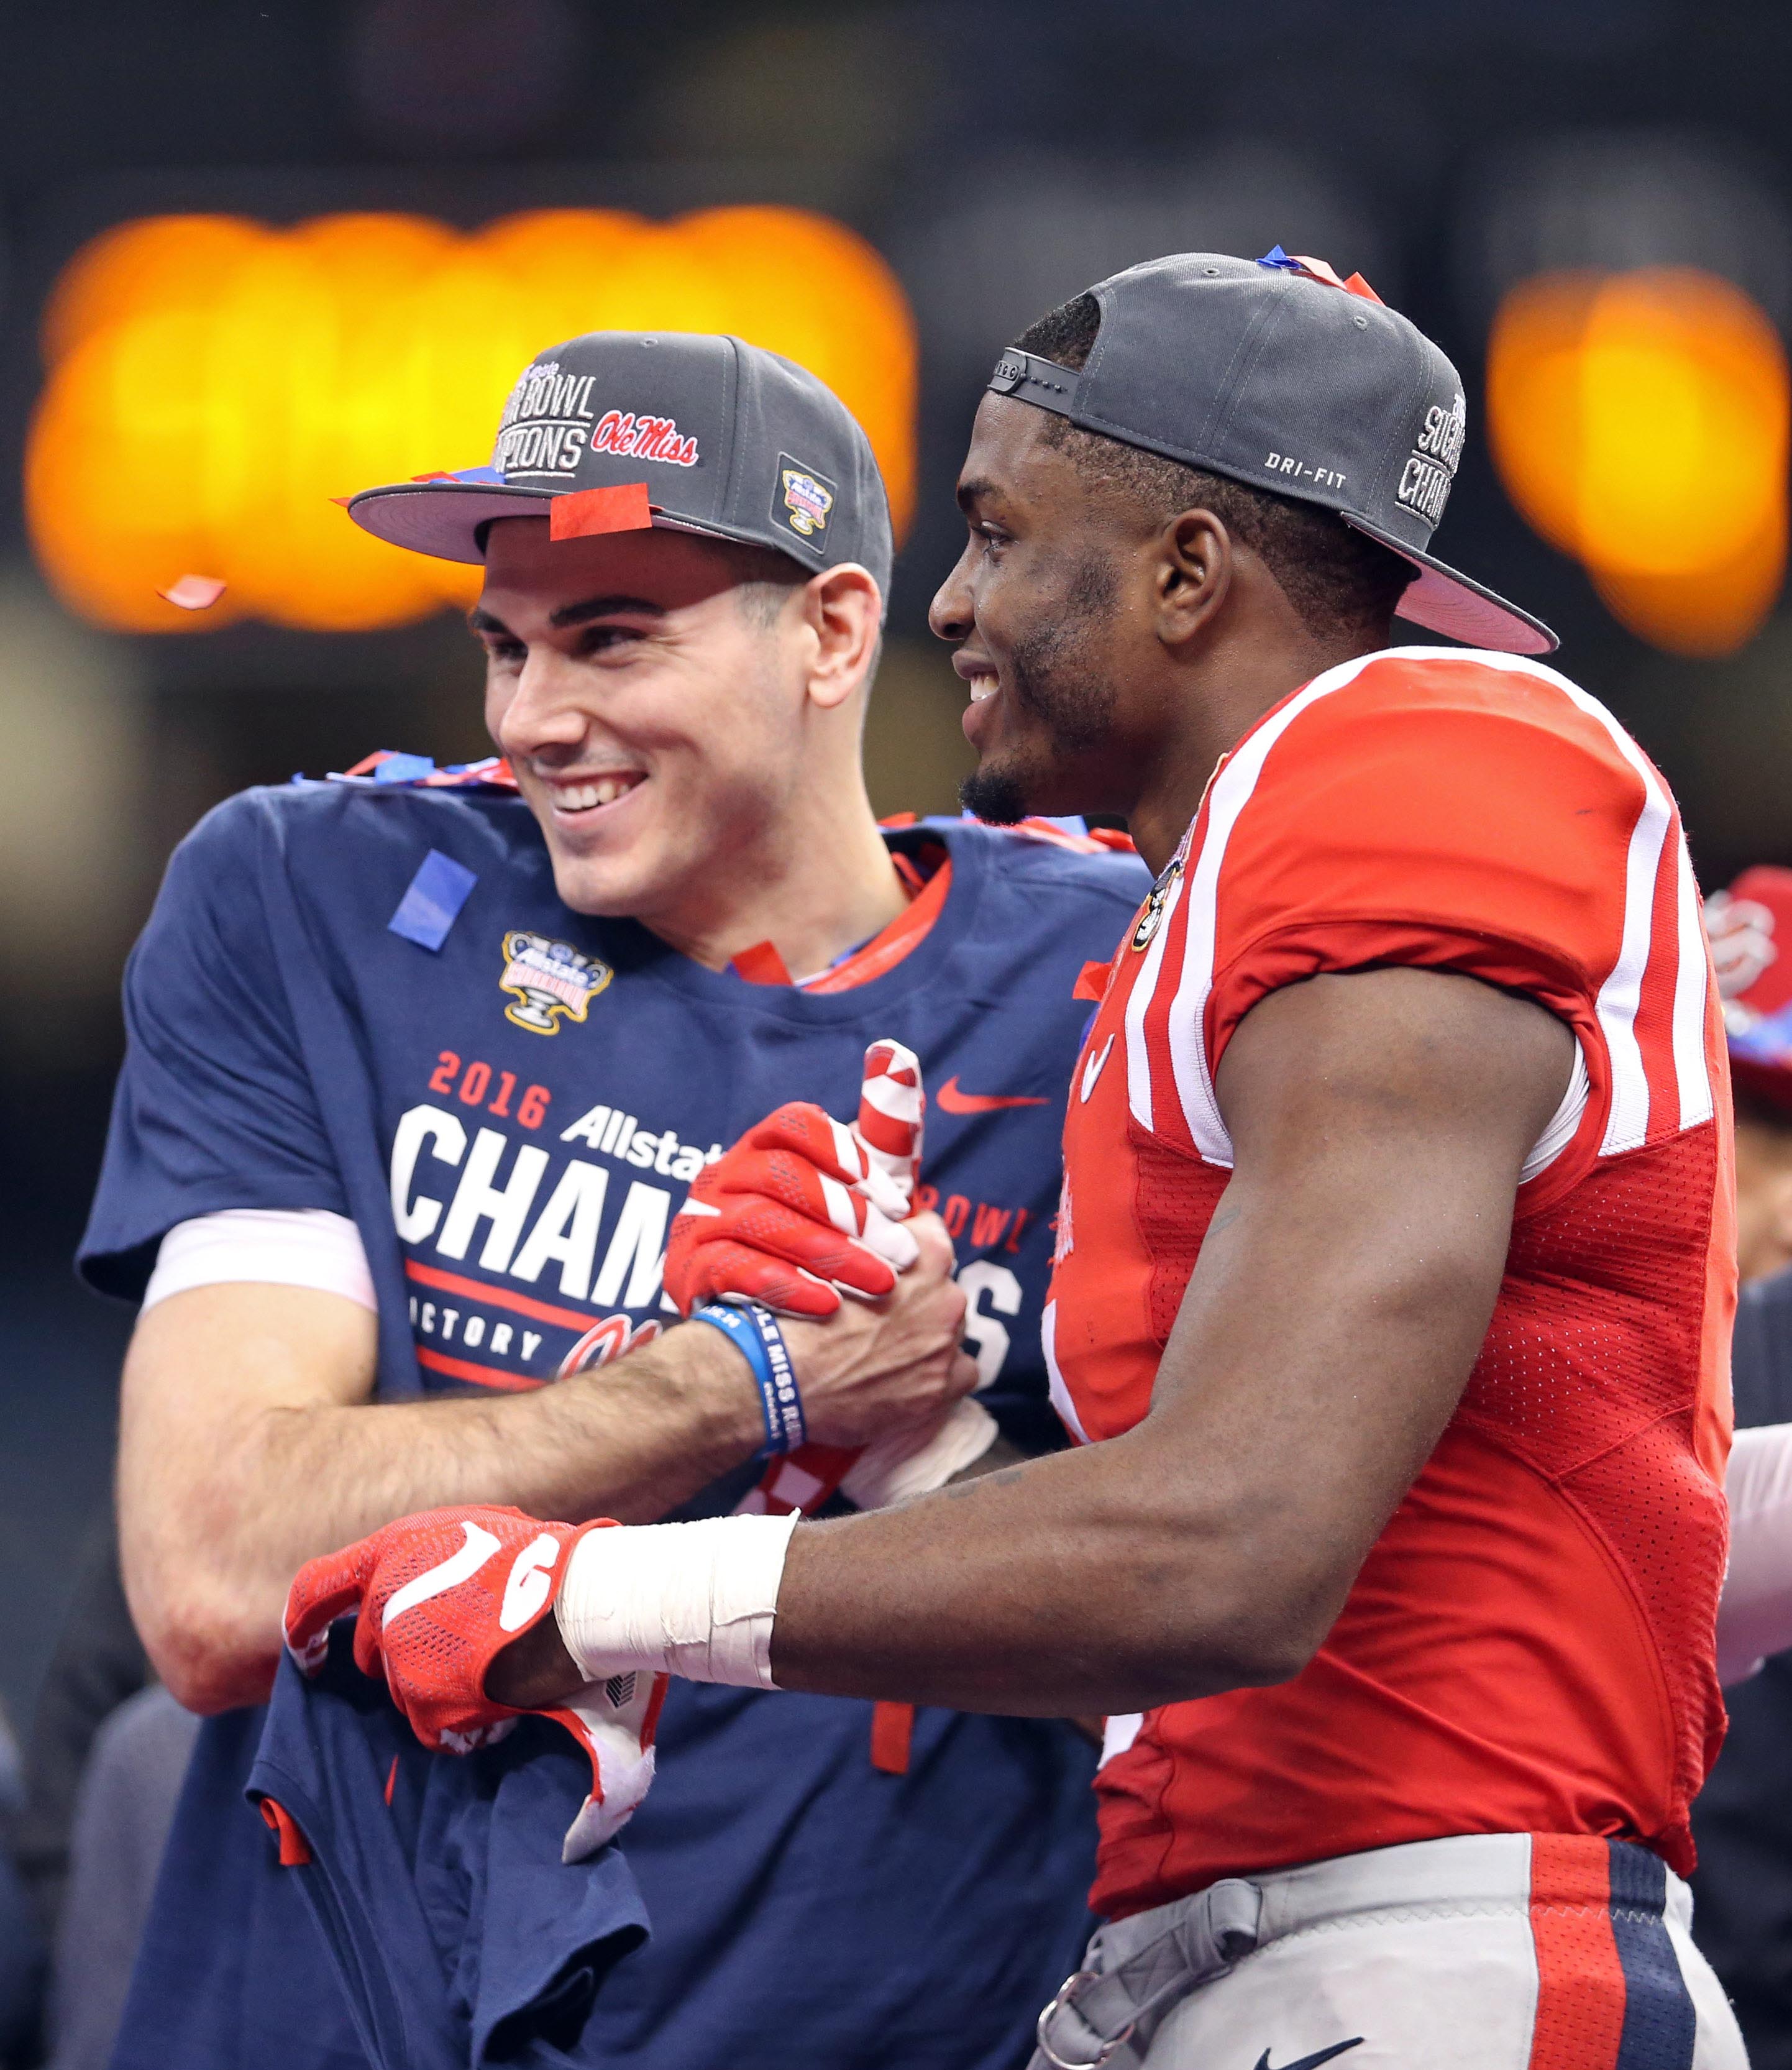 Ole Miss wrapped up one of the most lopsided Bowl Days in recent memory